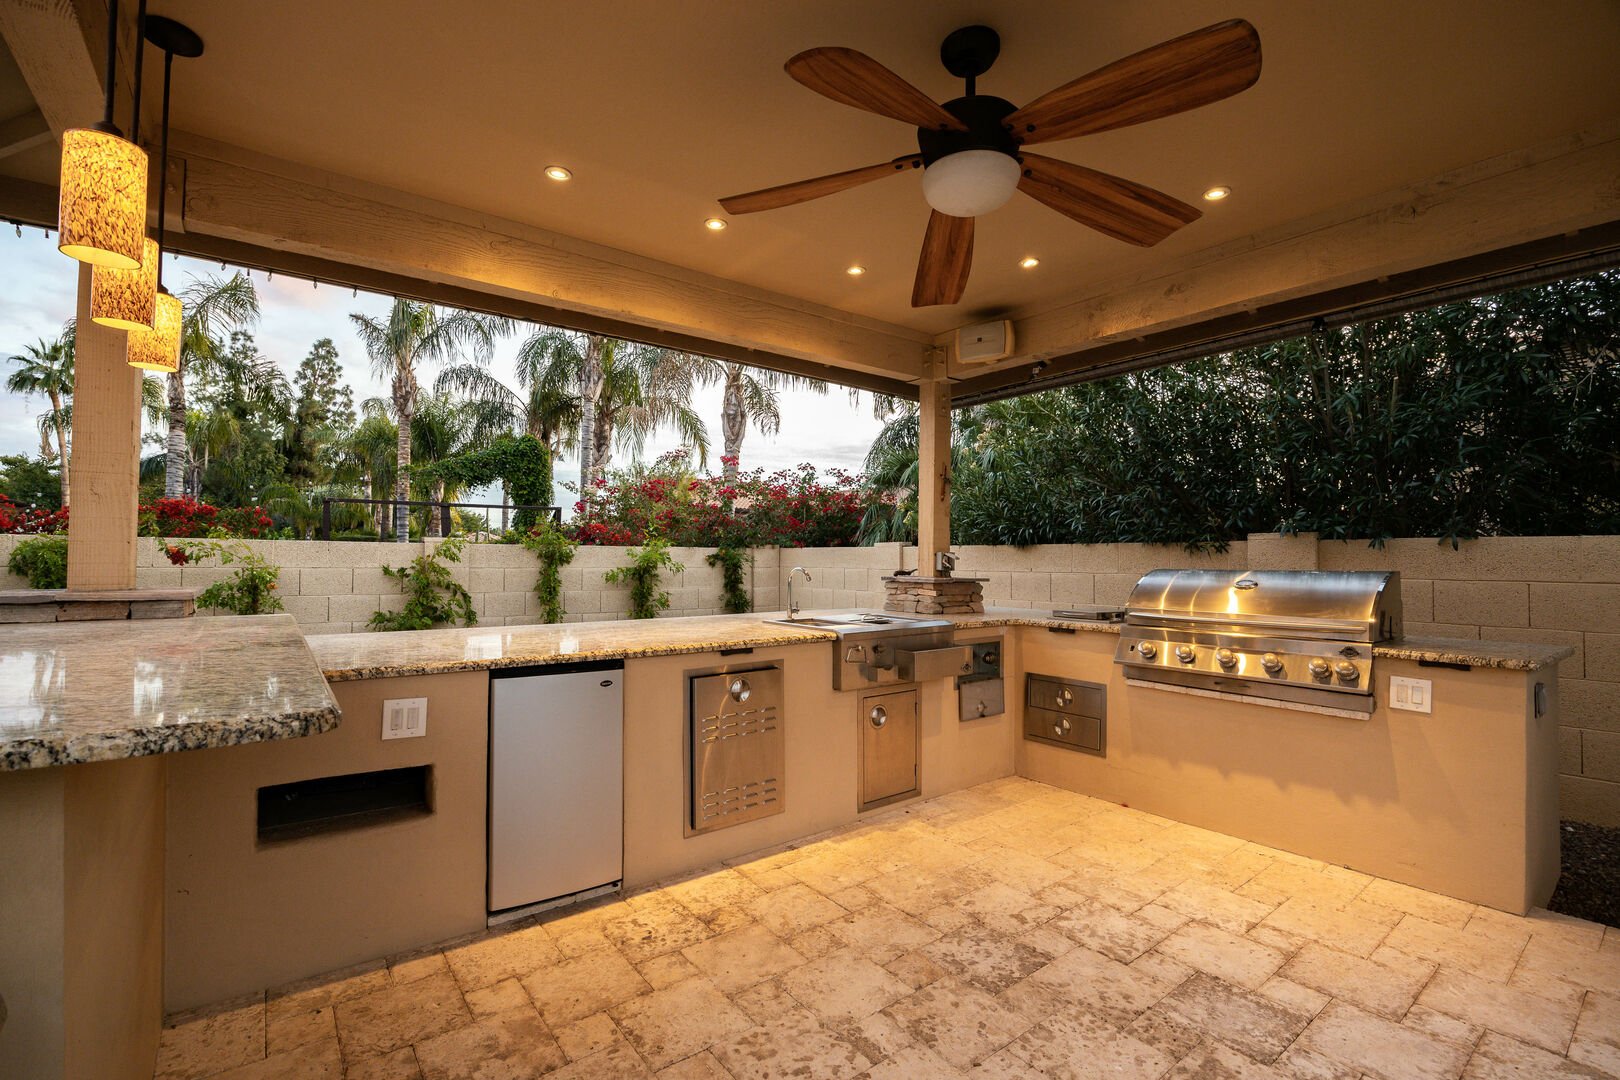 Outdoor kitchen and bar with BBQ Grill, sink and fridge.